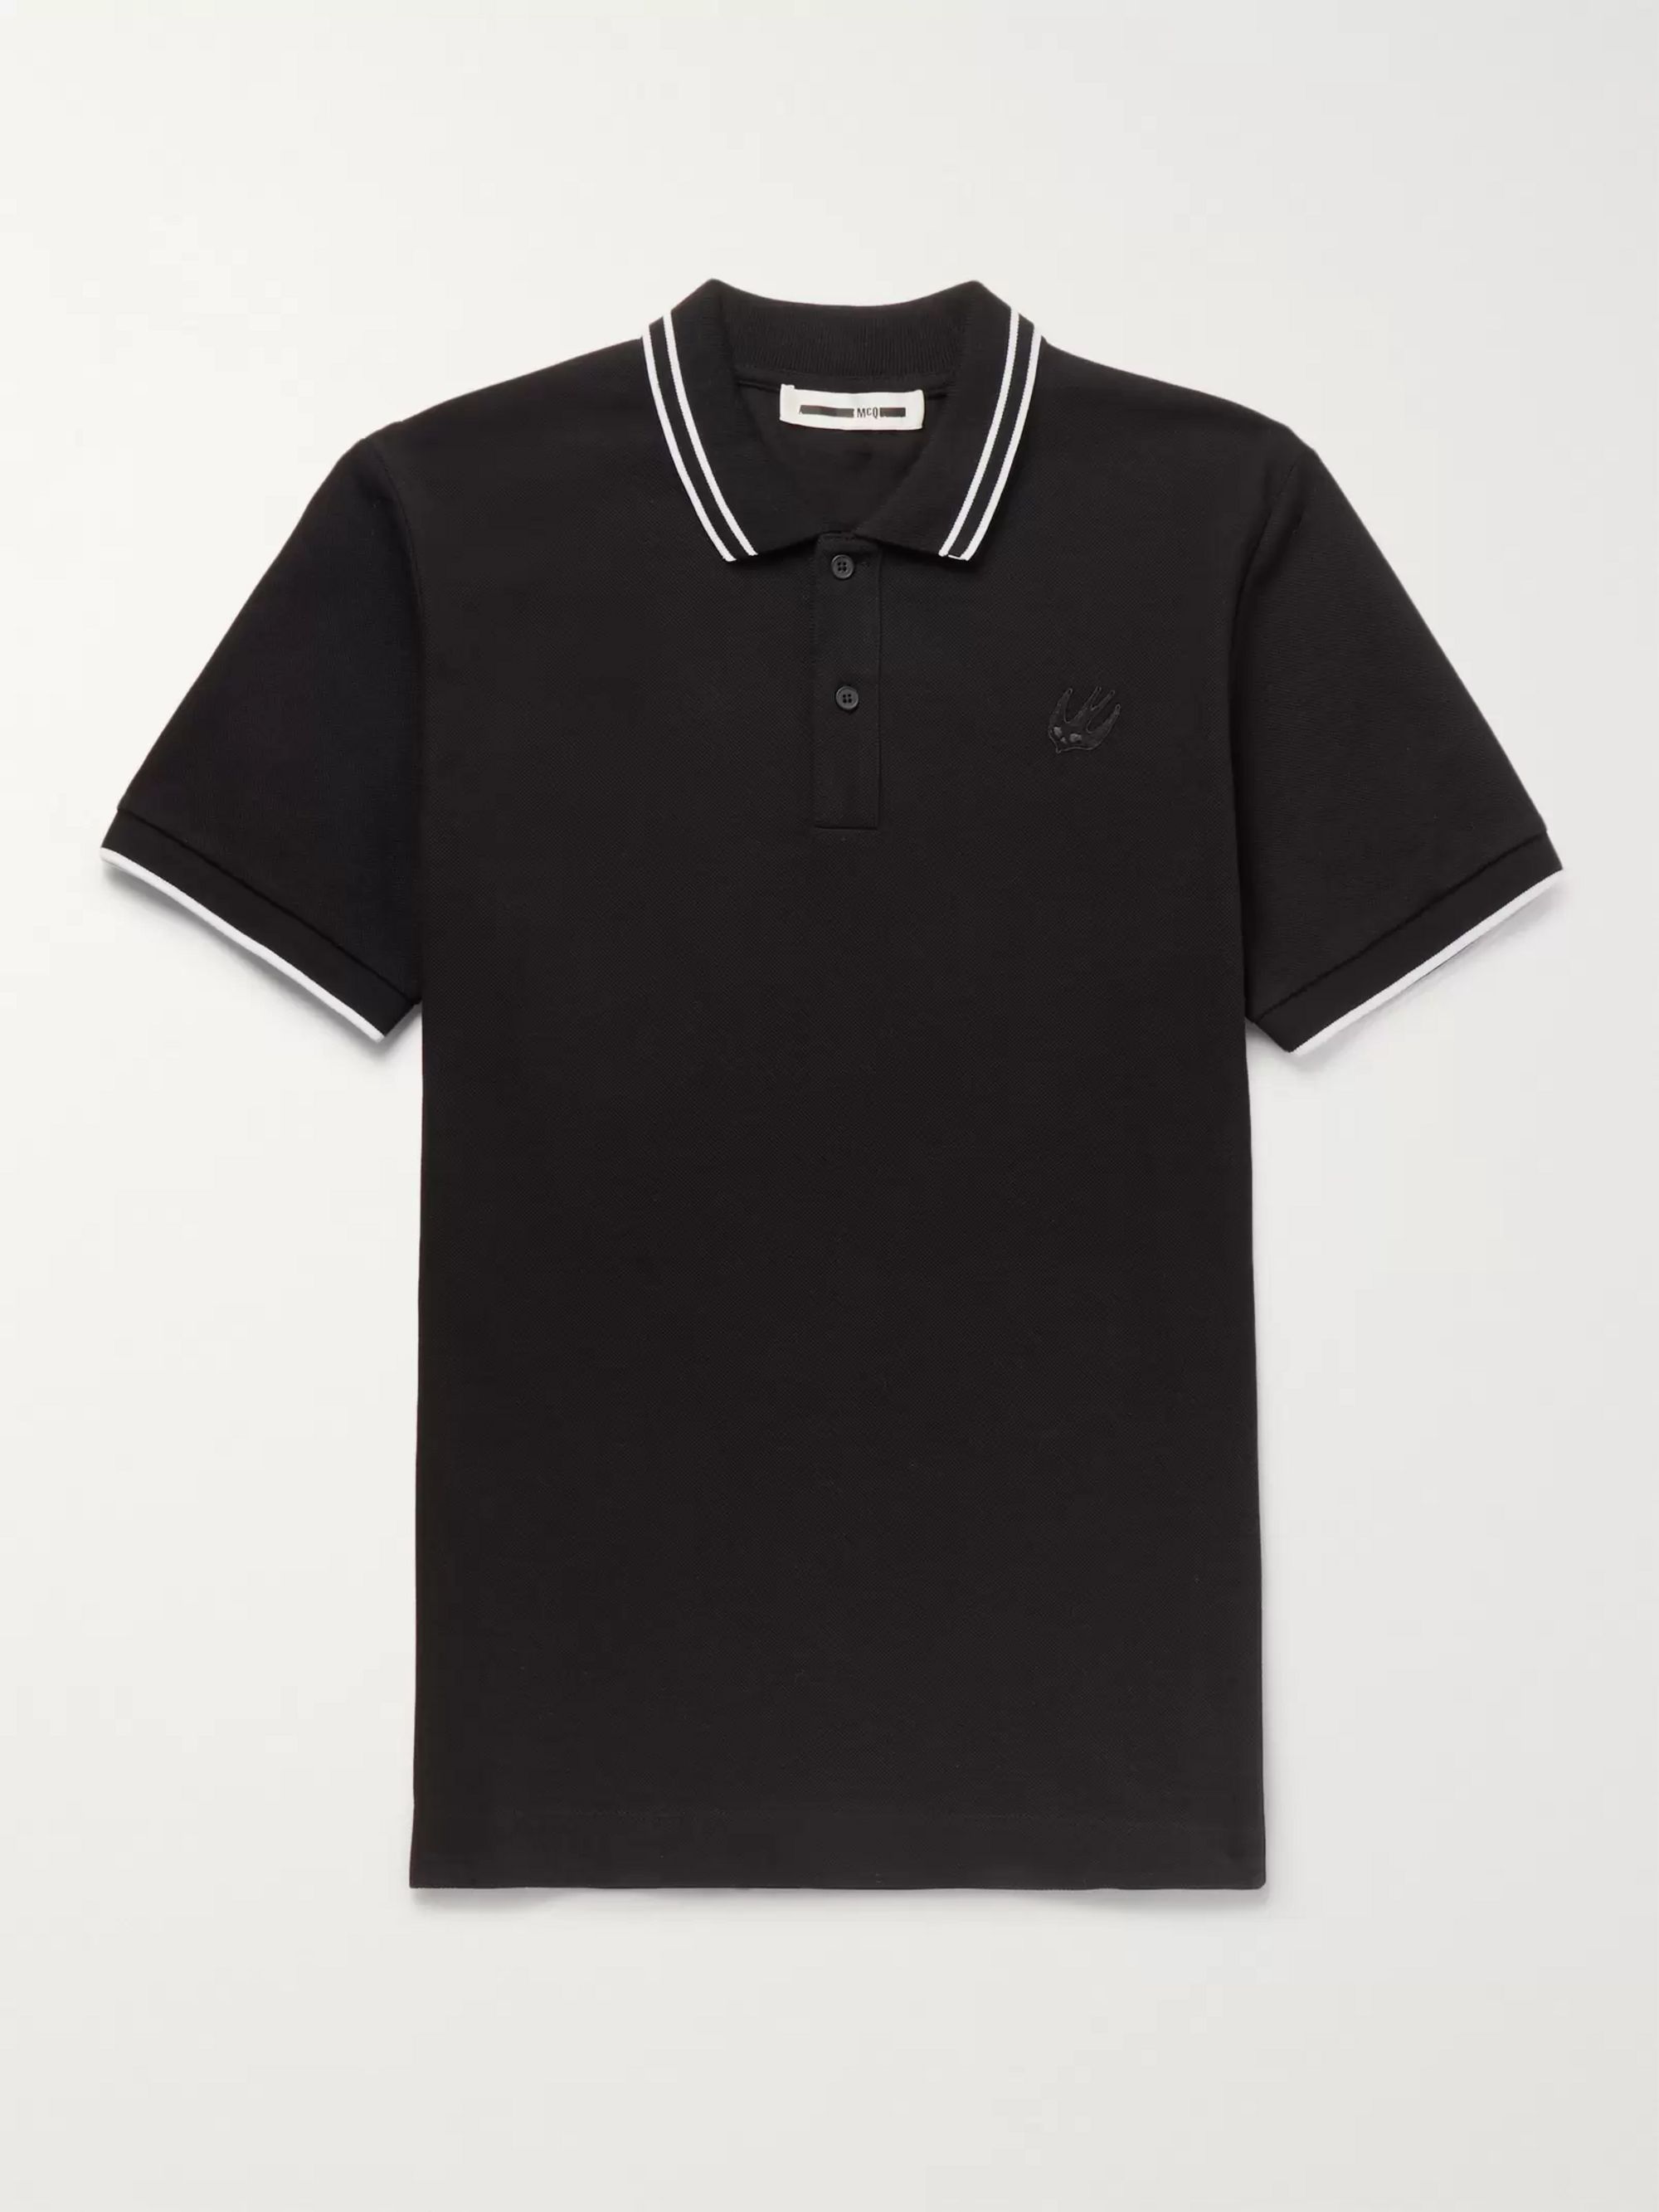 Black Slim-Fit Contrast-Tipped Cotton 